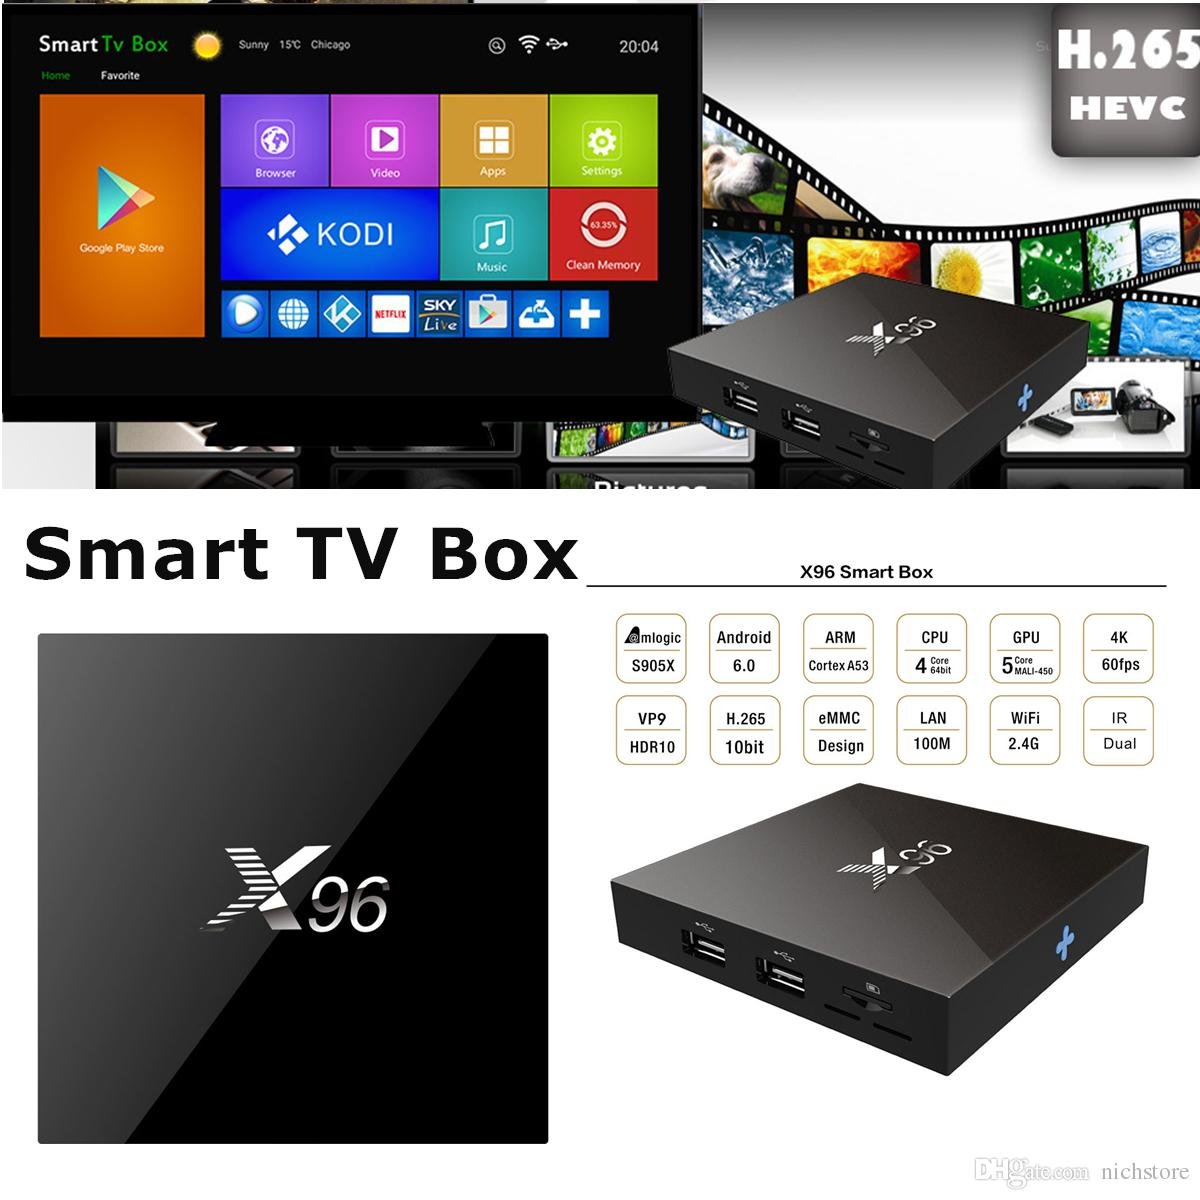 kodi download 16.1 for android box